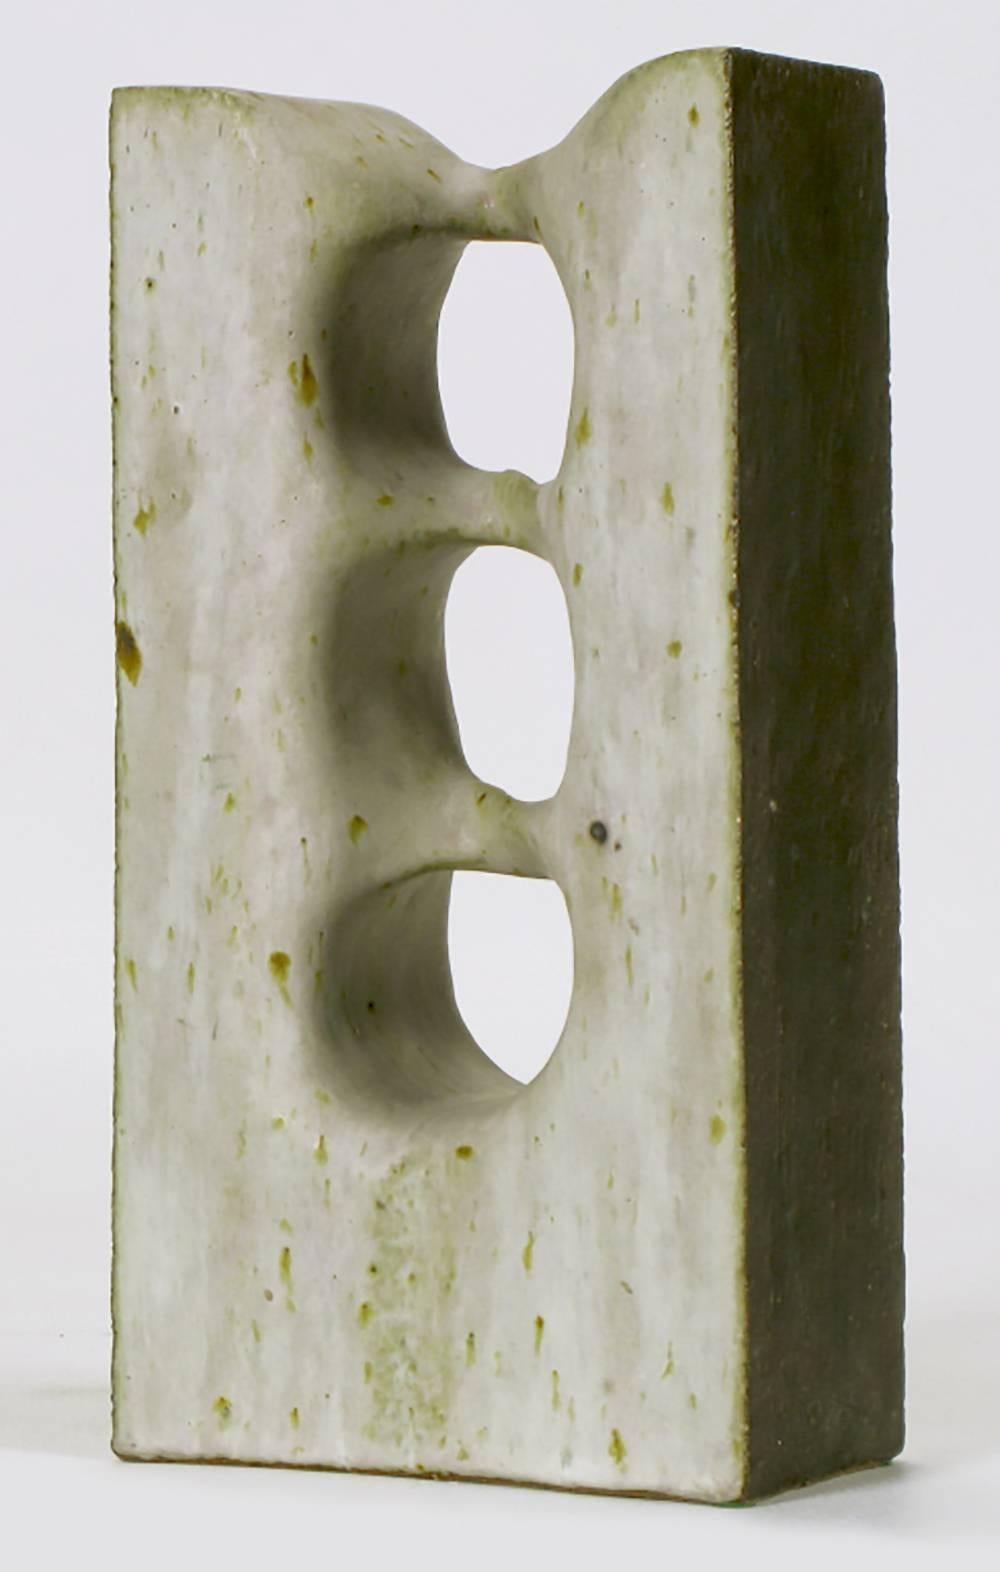 Glazed and pierced vertical abstract sculpture by Tomiya Matsuda, Japanese (1939-2011). Hand molded and cast earthen clay with an off-white matte glaze that has some green tones and heathered markings.

Until 1948, Japanese ceramic artists focused